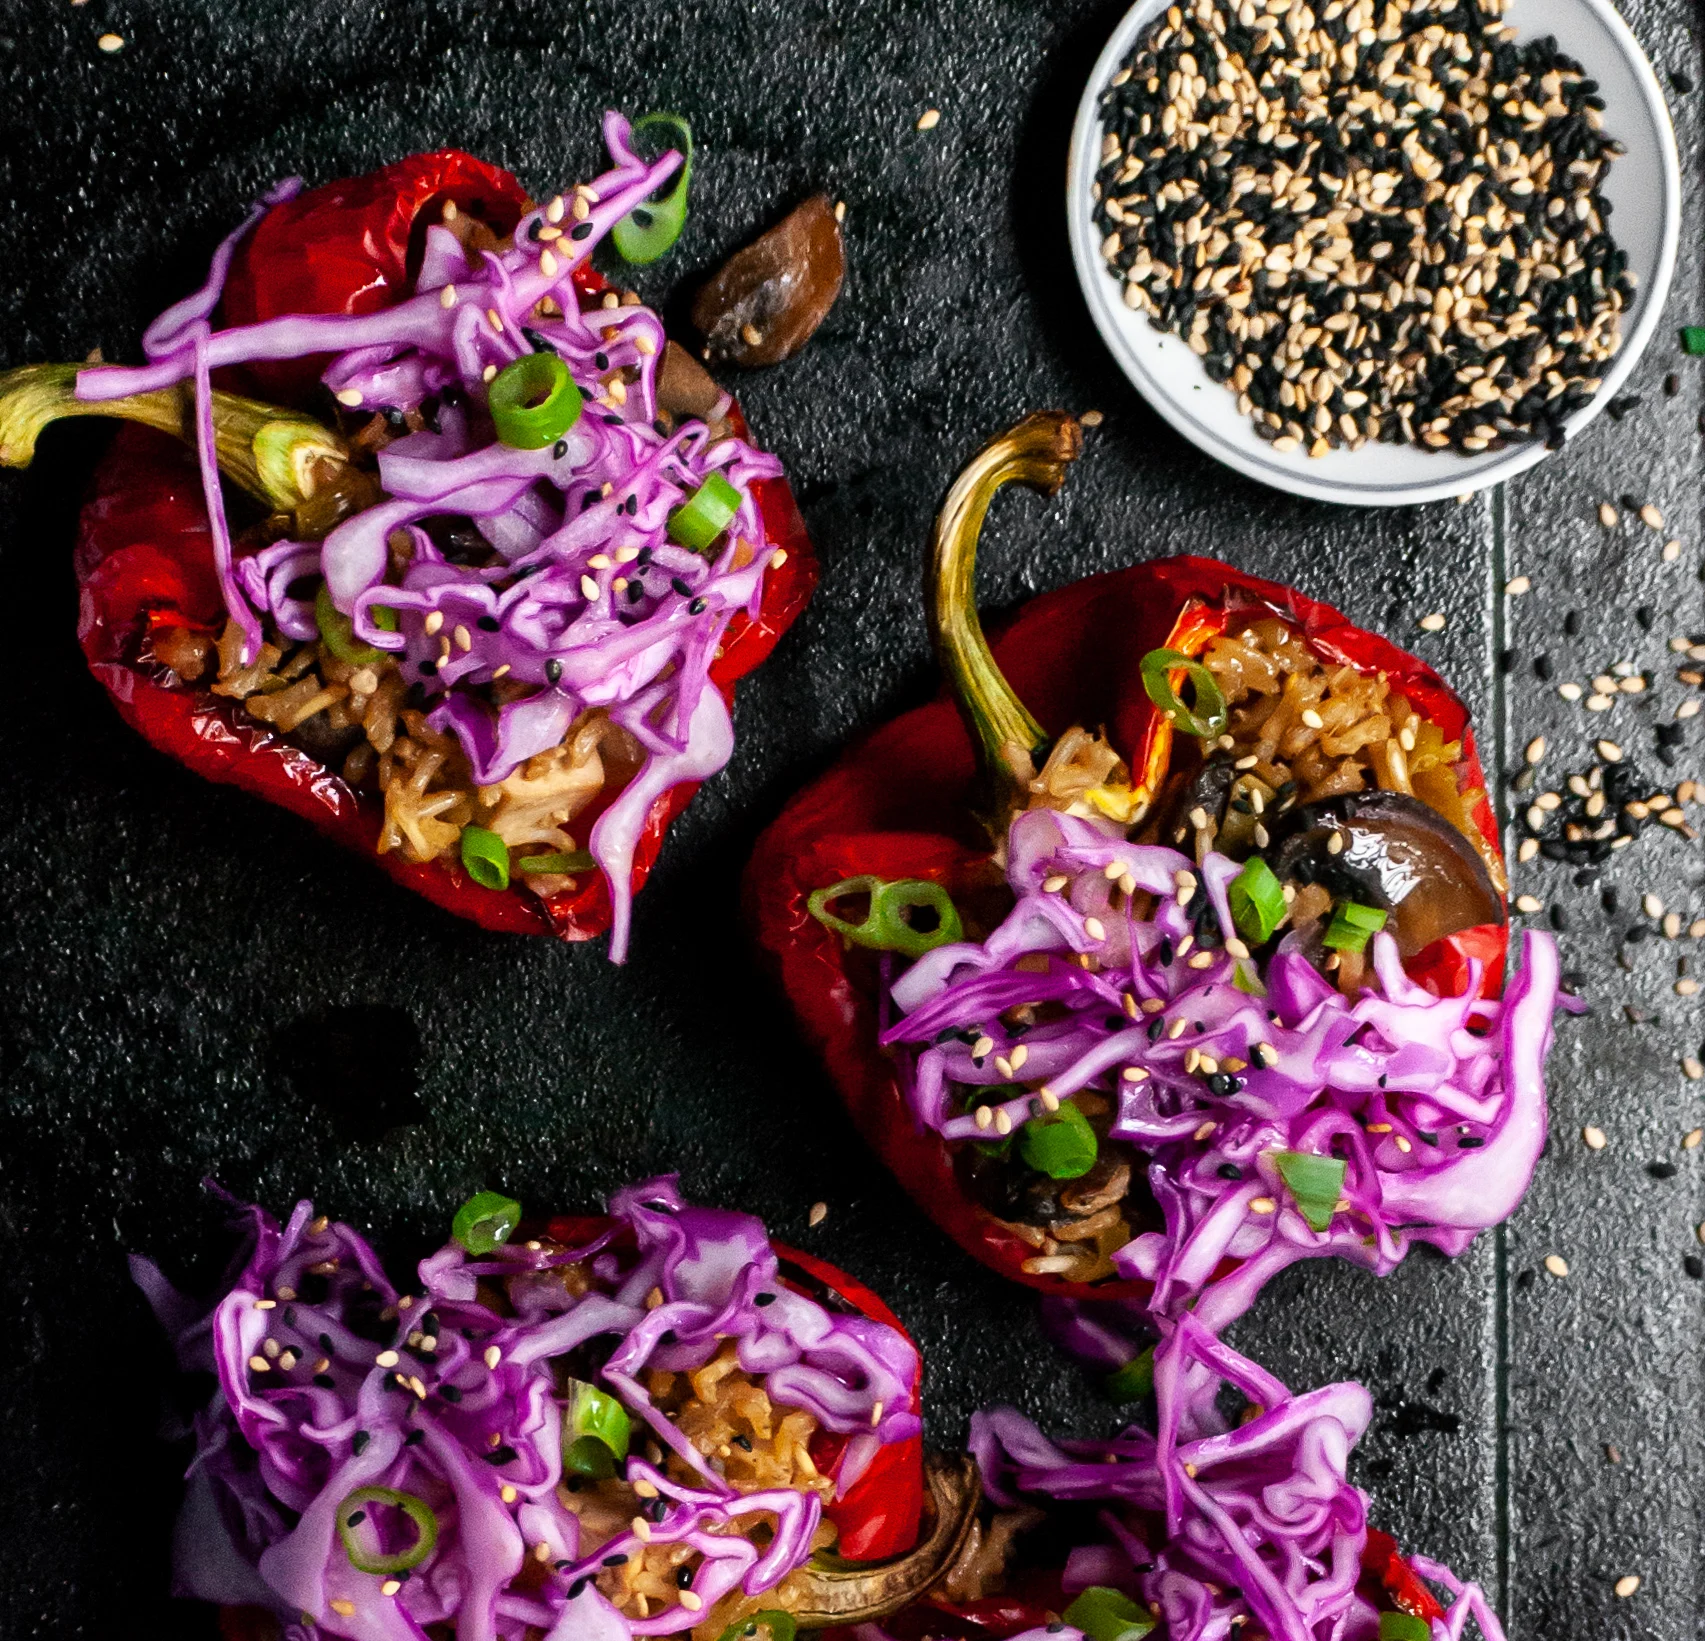 Roasted Peppers Stuffed with Sesame Ginger Mushrooms, Tofu and Rice, Topped with Red Cabbage Slaw